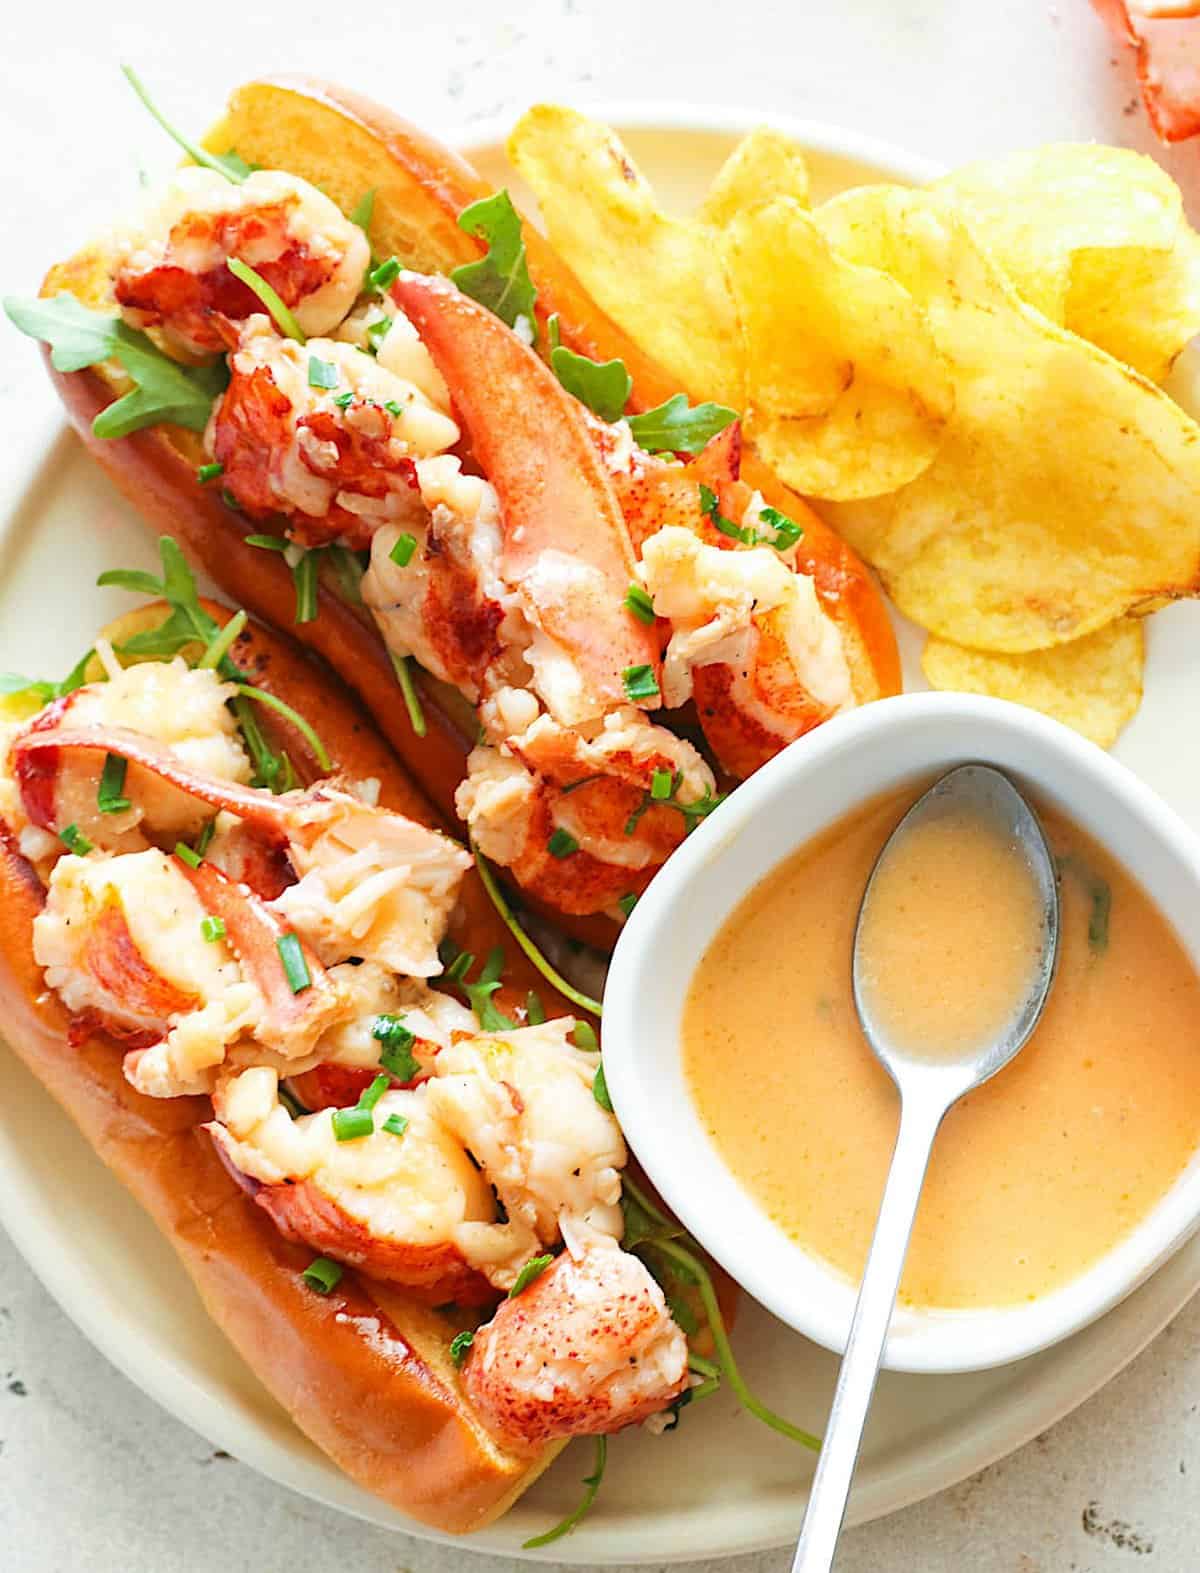 Serving up freshly assembled Connecticut Lobster Rolls with potato chips and extra butter sauce for a satisfying meal